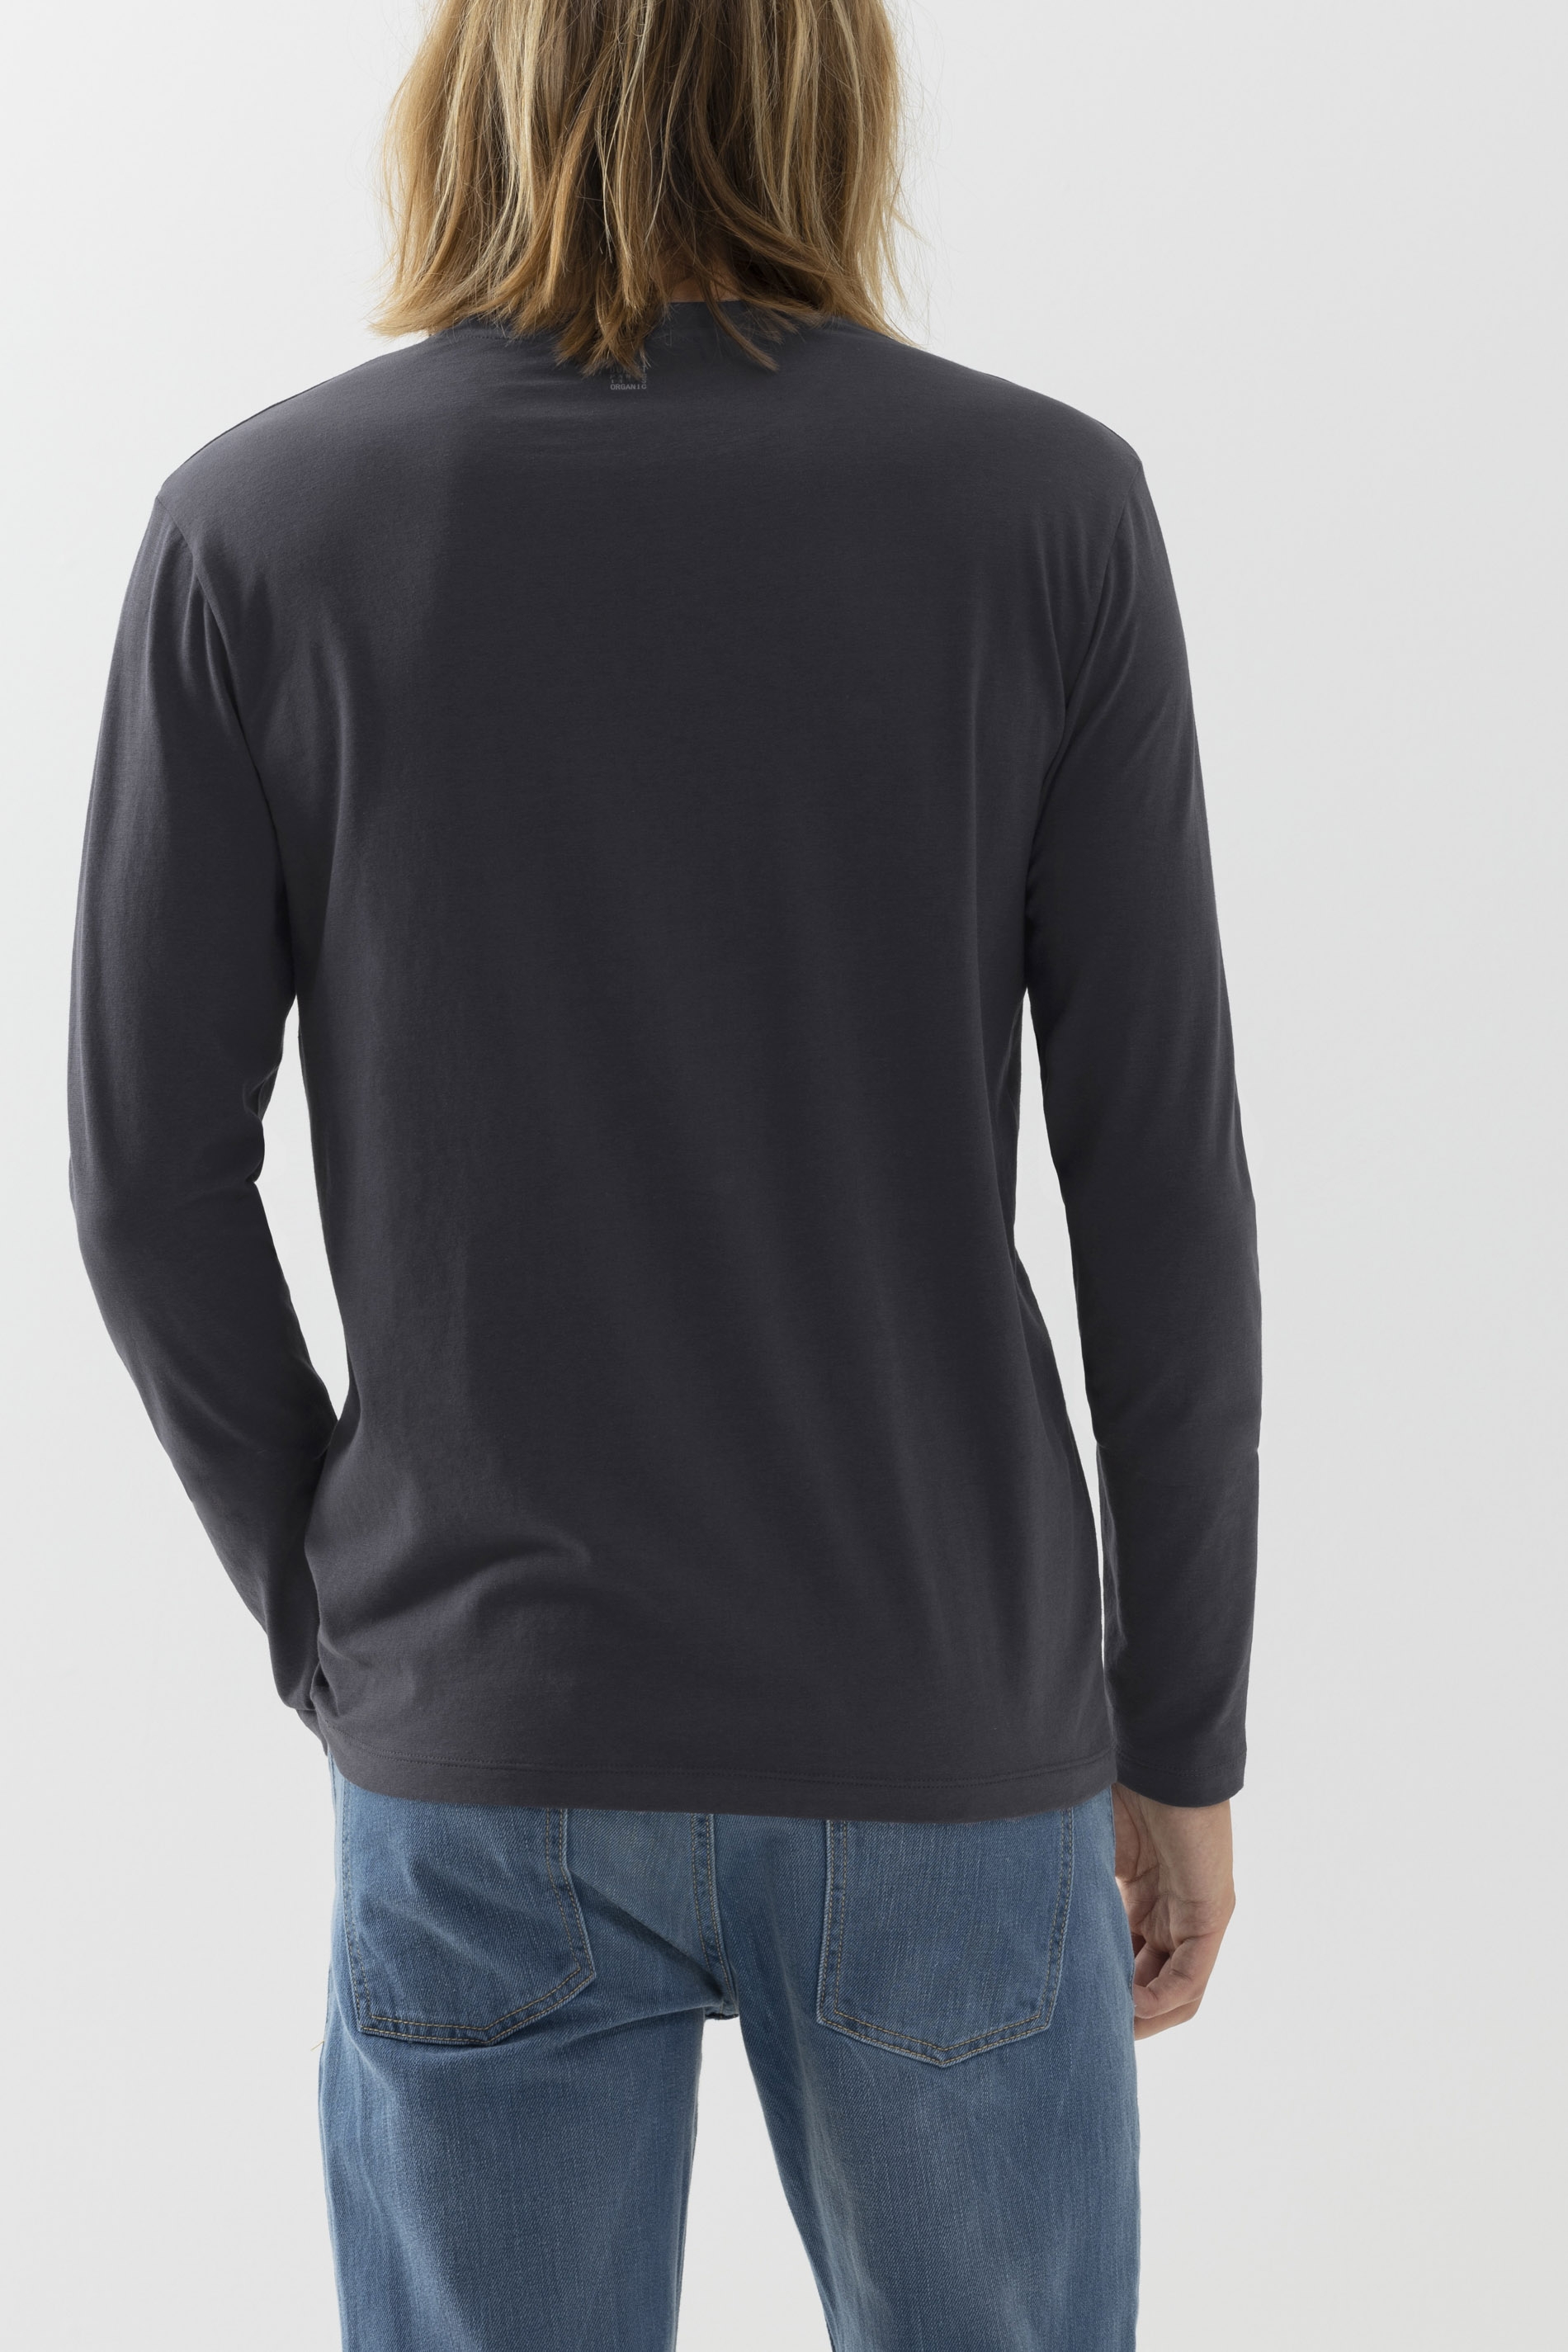 Long sleeves Serie Relax Rear View | mey®